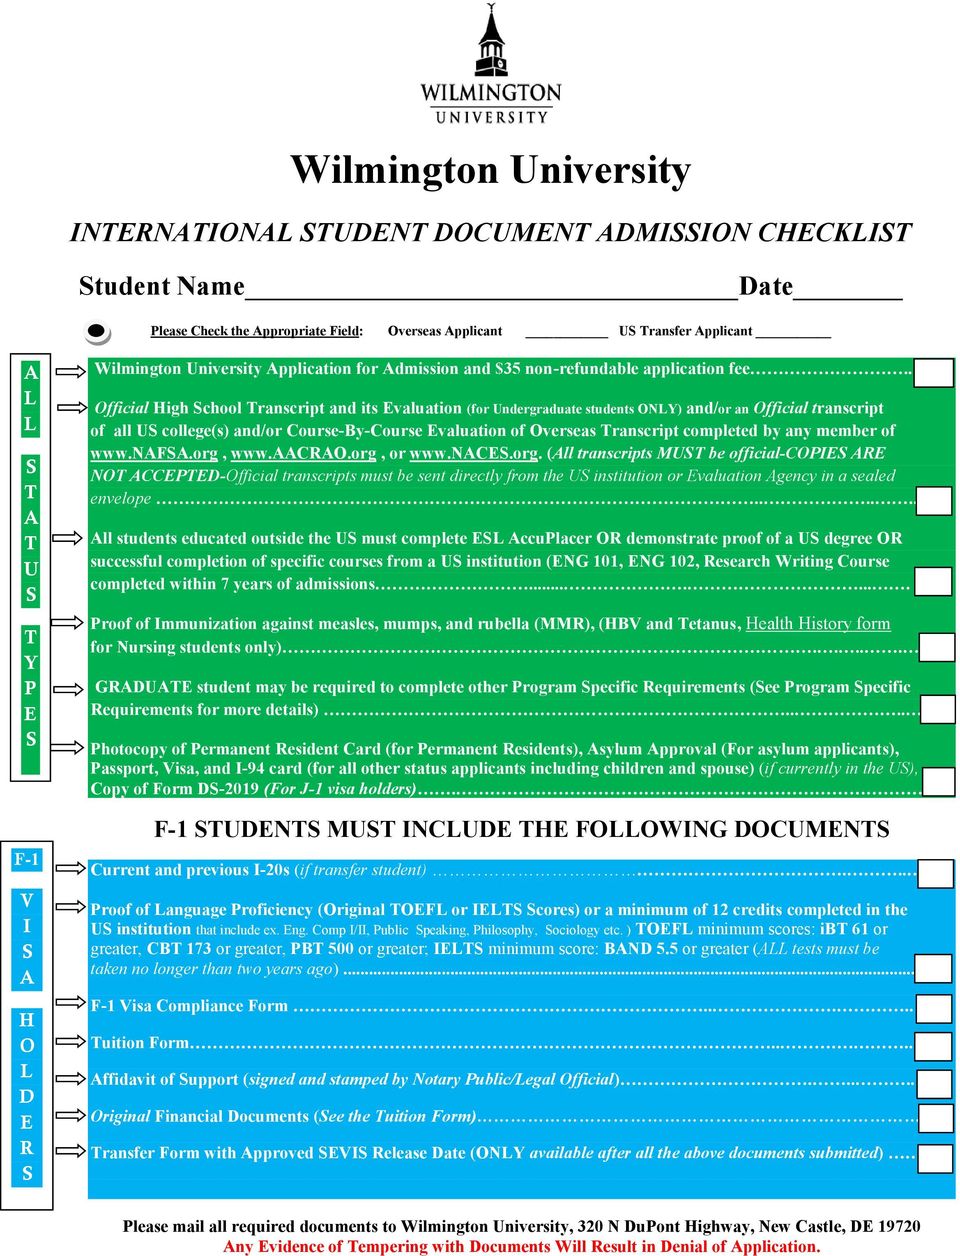 . Official High School Transcript and its Evaluation (for Undergraduate students ONLY) and/or an Official transcript of all US college(s) and/or Course-By-Course Evaluation of Overseas Transcript